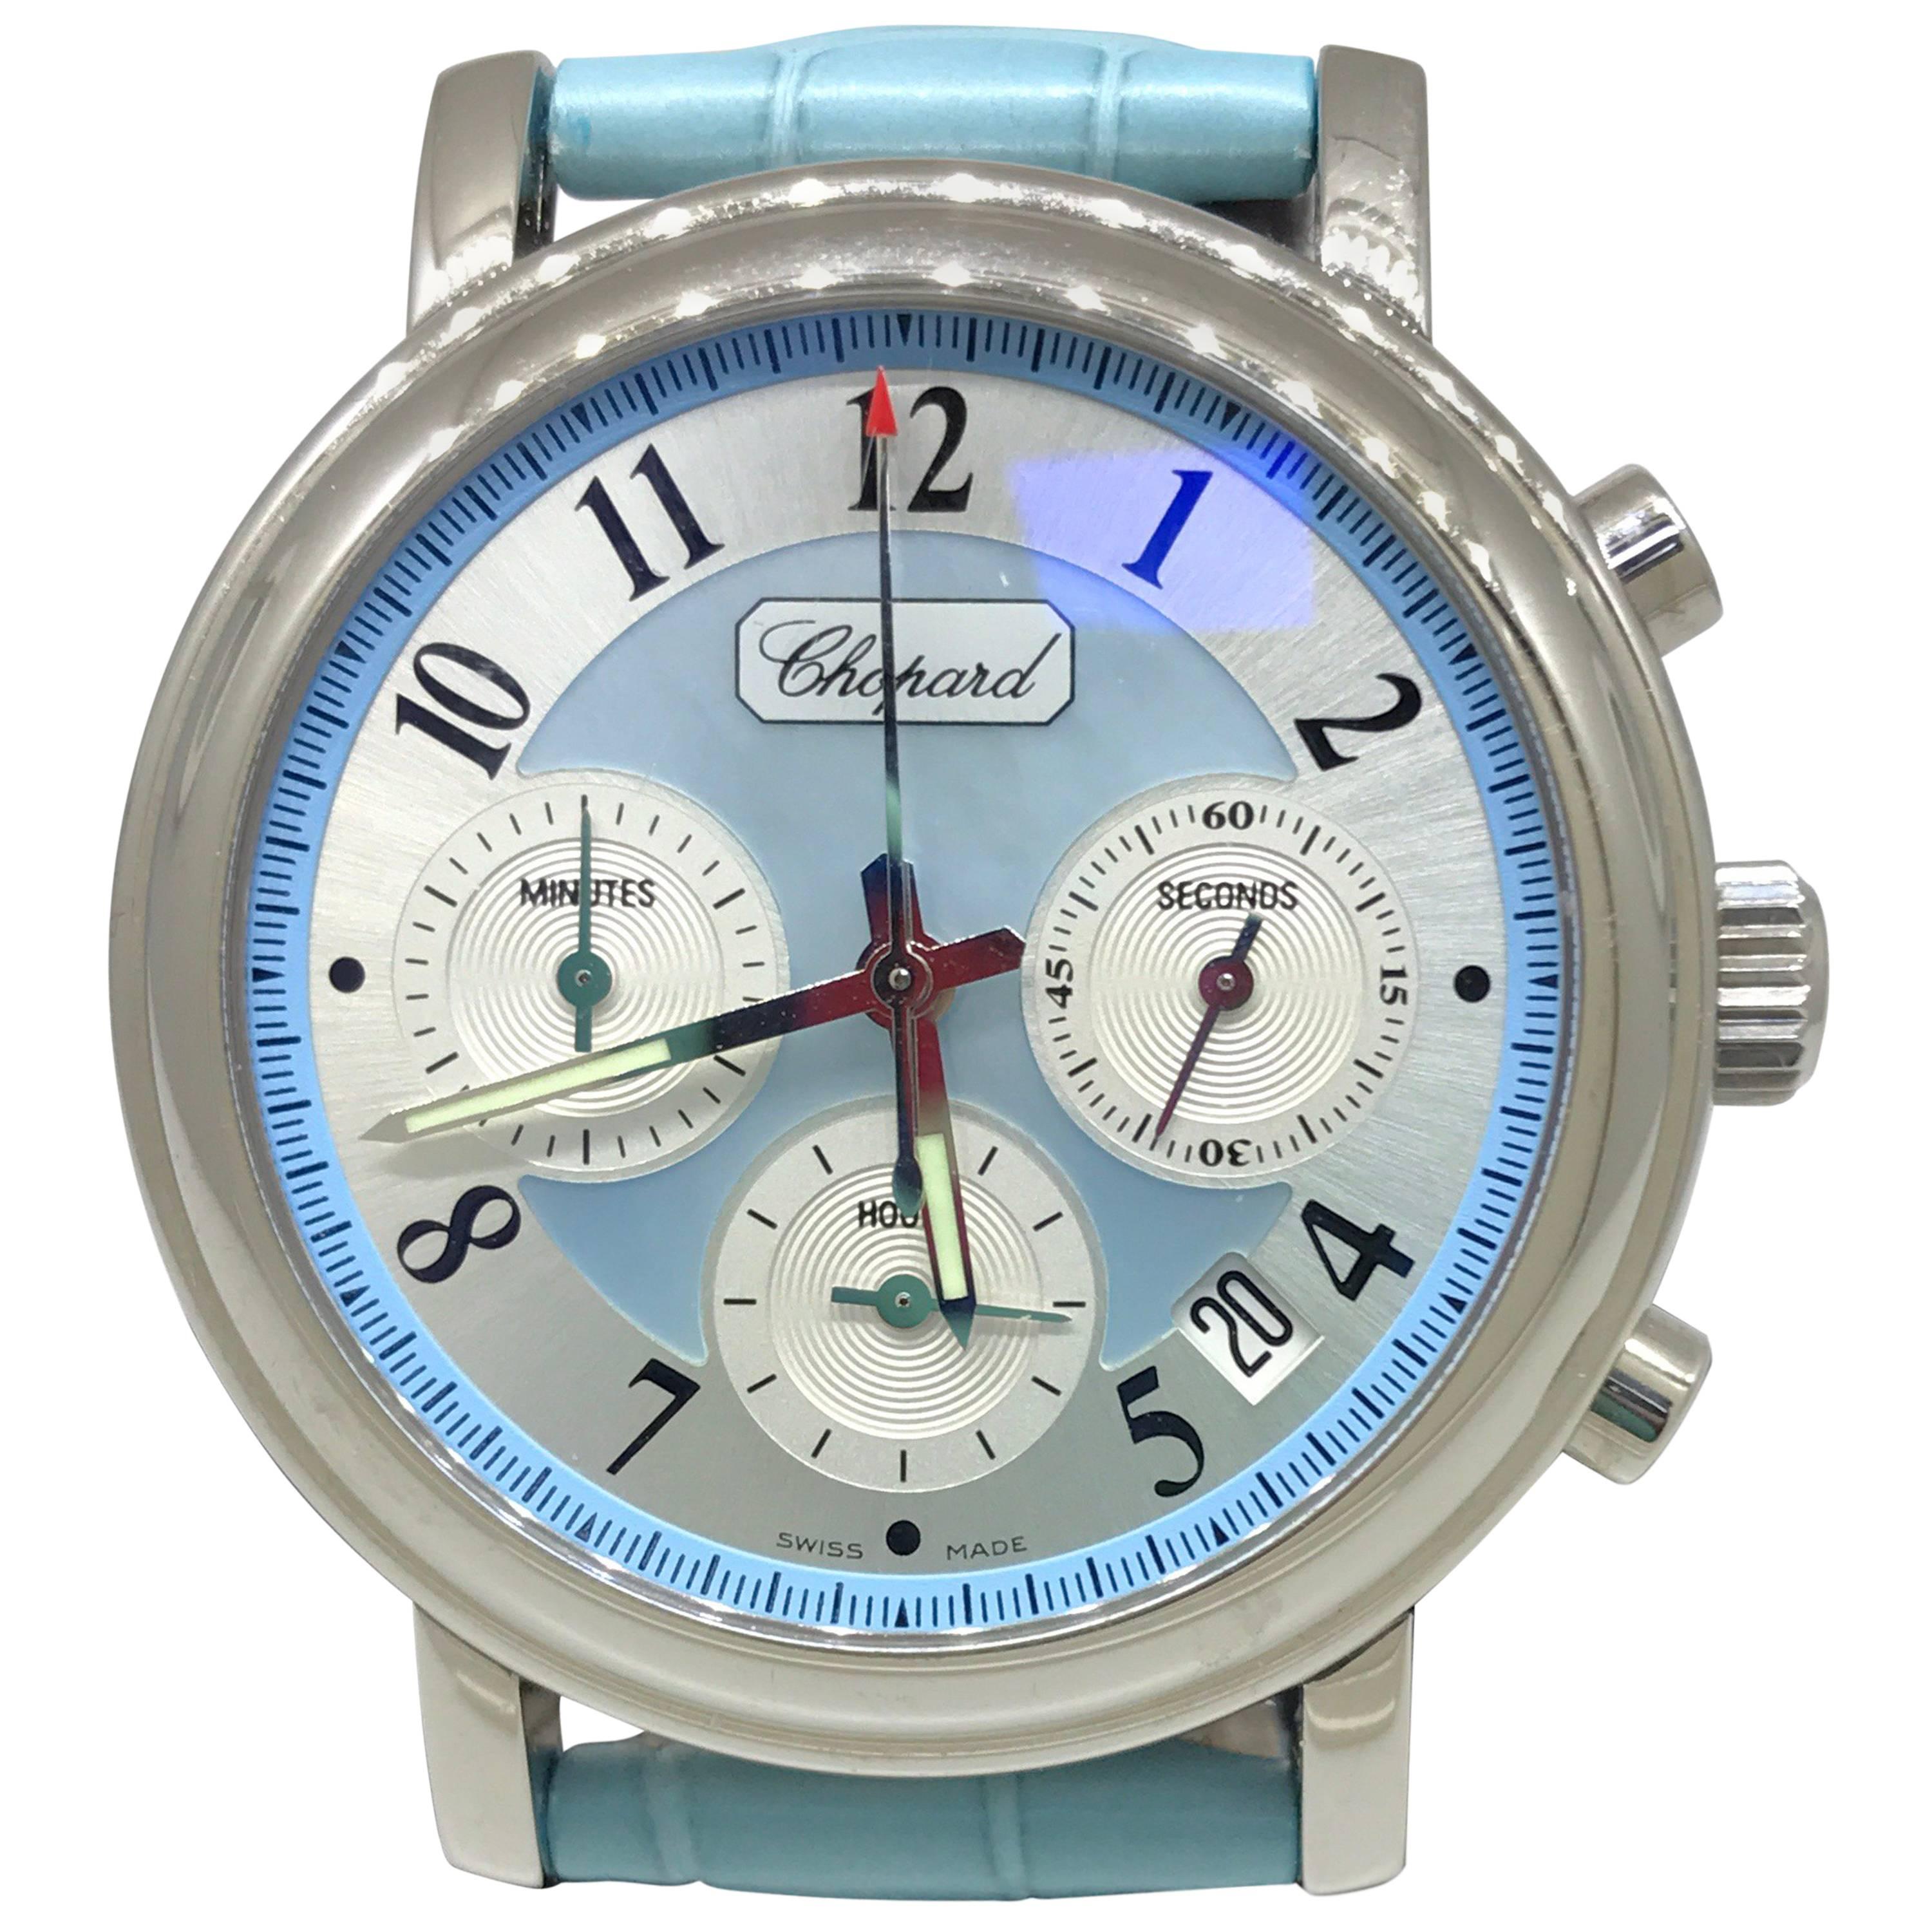 Chopard Mille Miglia Elton John Blue Dial and Leather Band Chronograph Watch